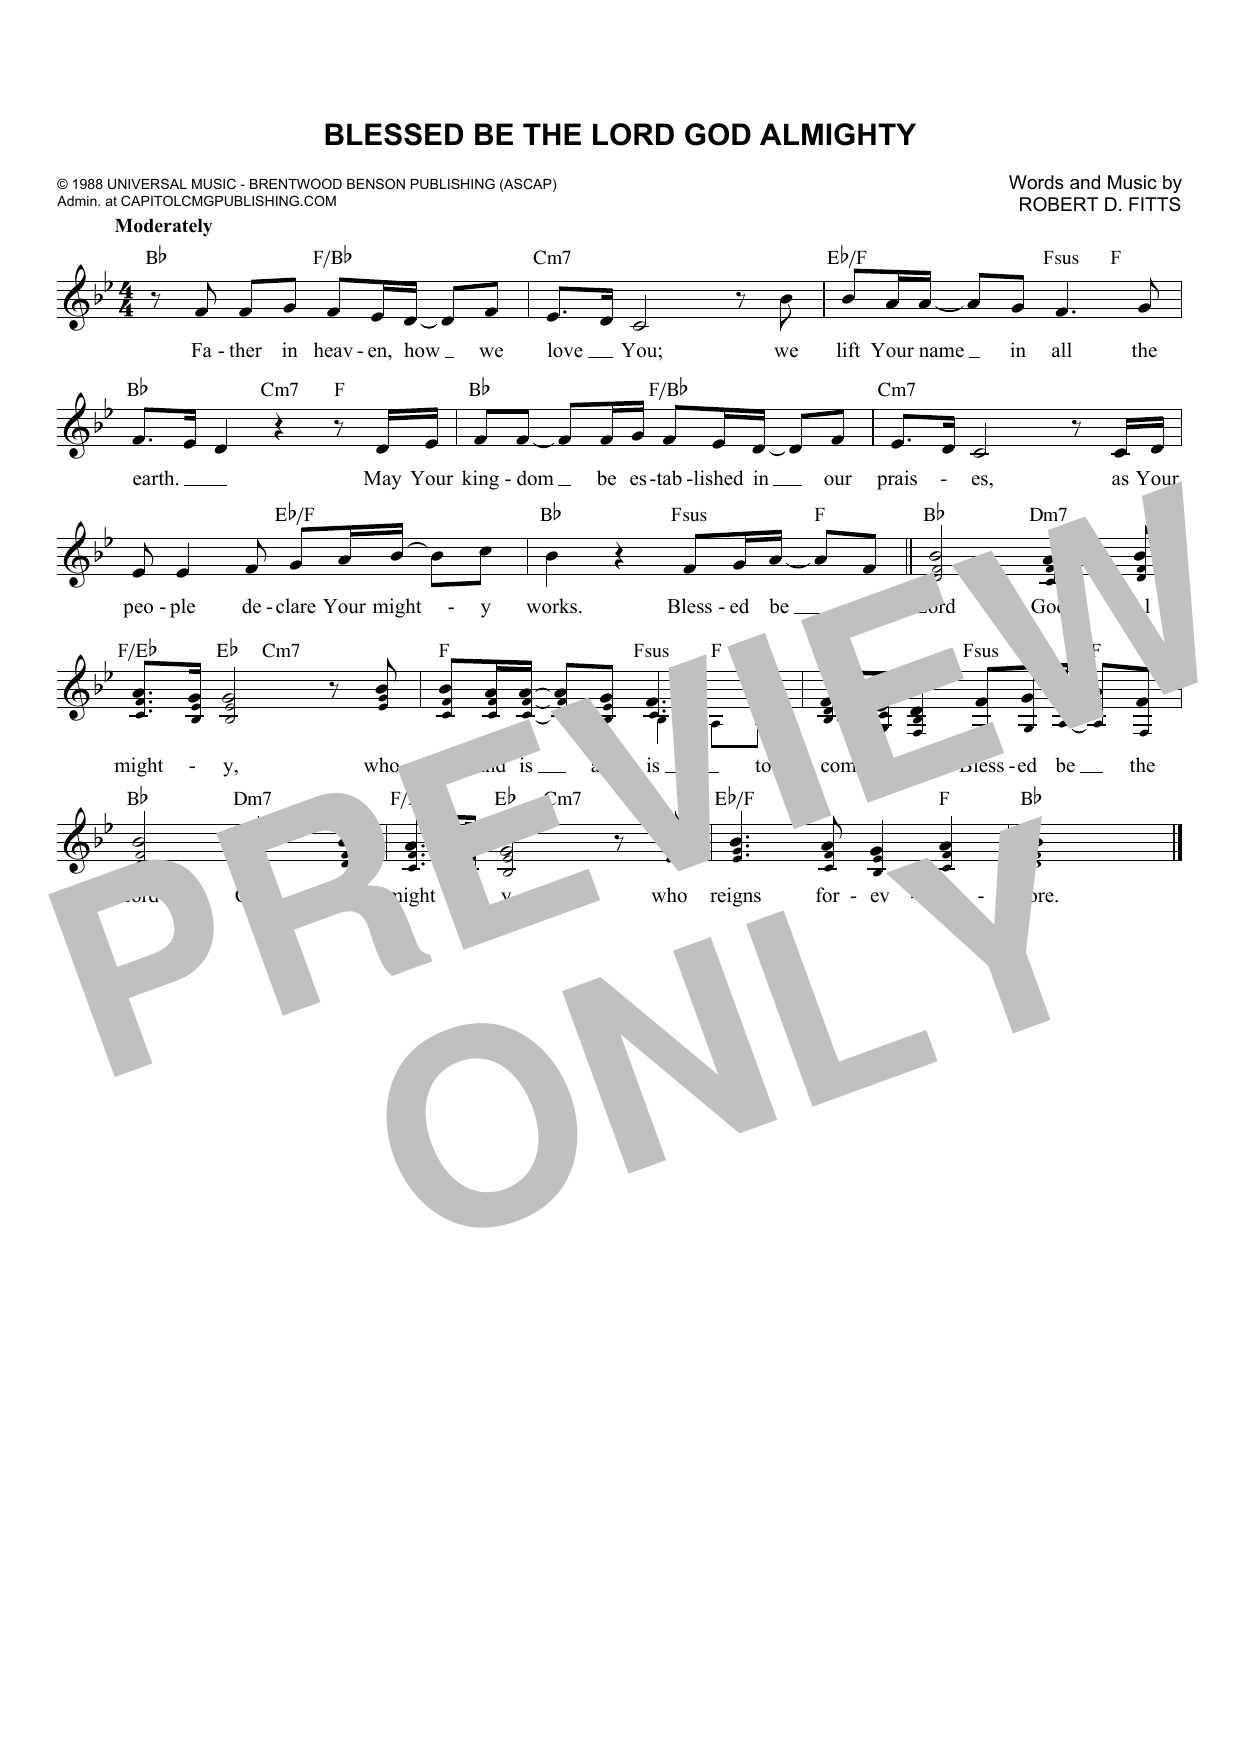 Download Robert D. Fitts Blessed Be The Lord God Almighty Sheet Music